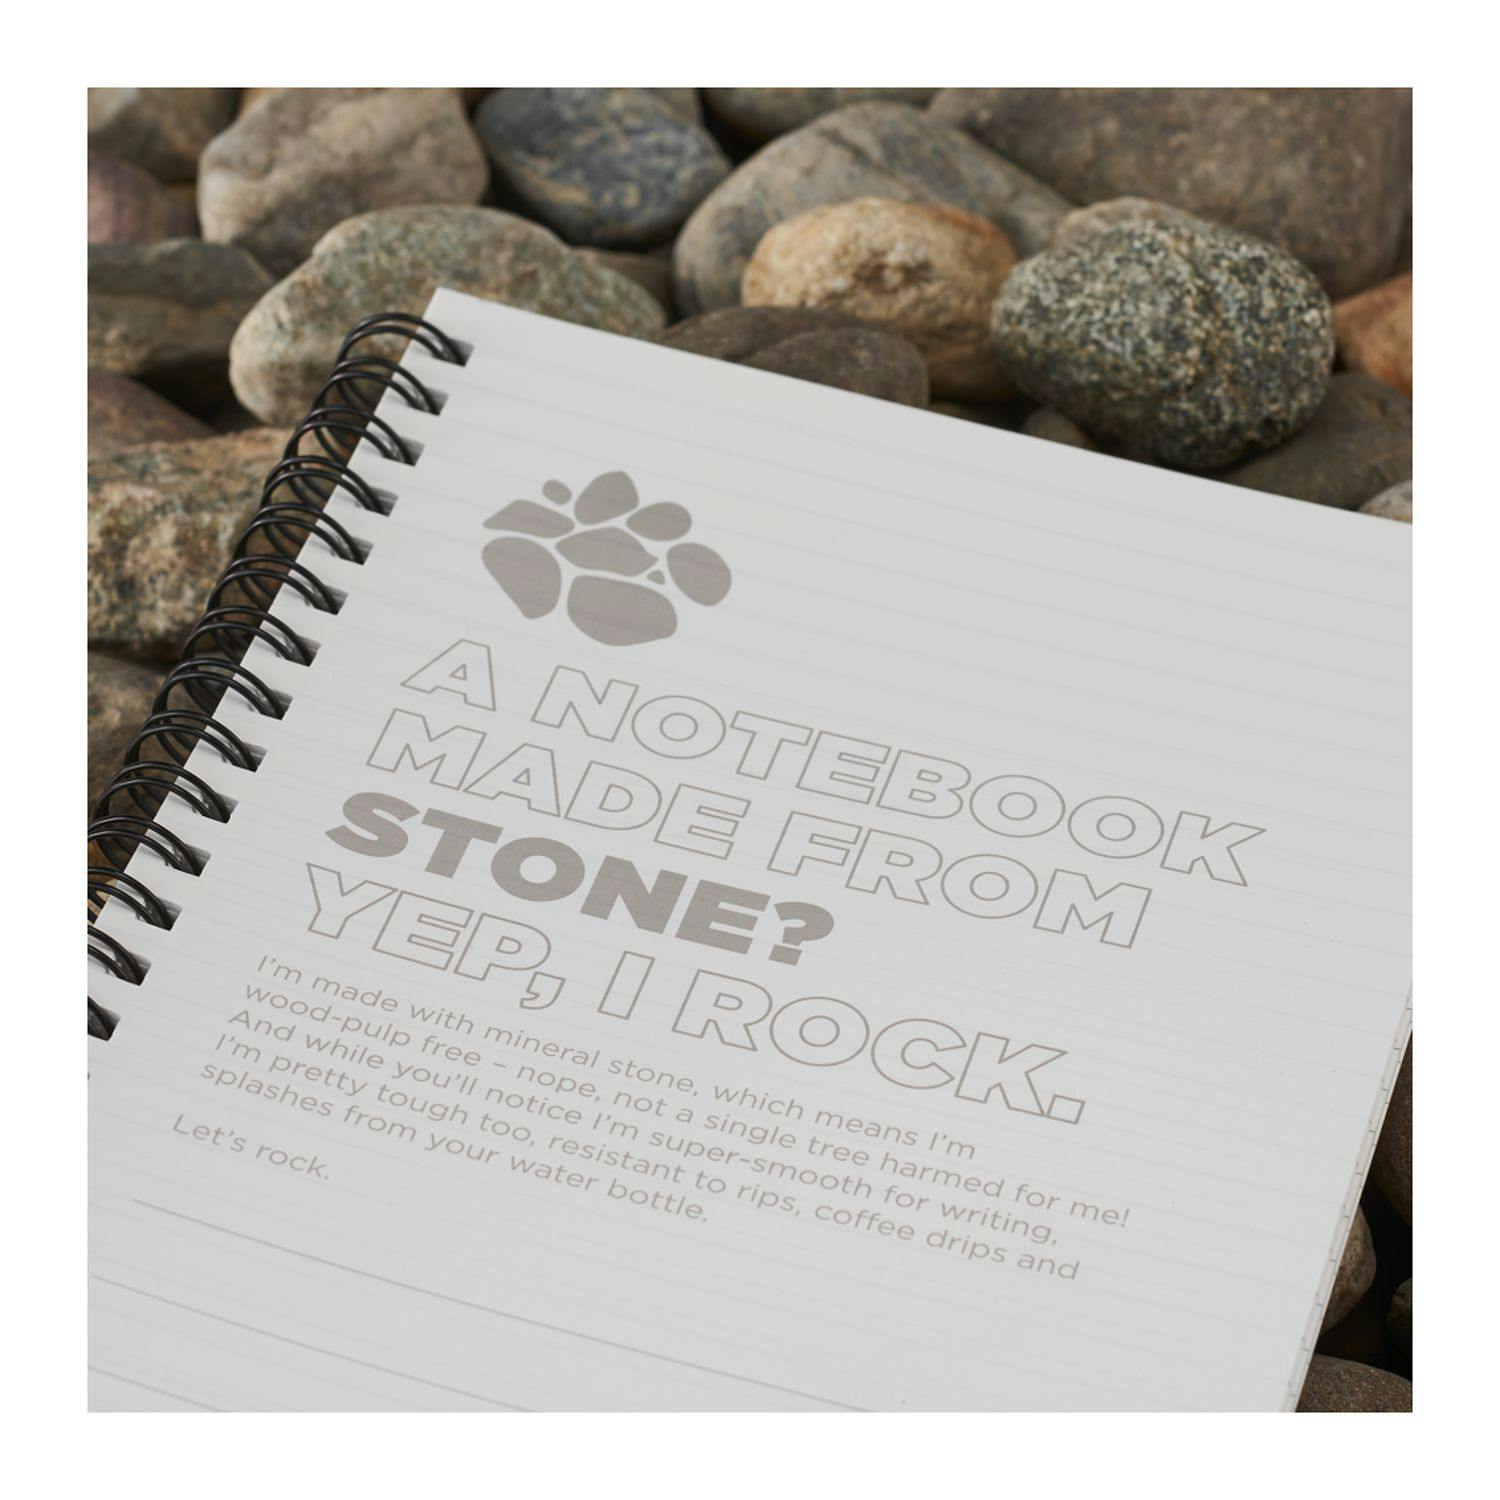 5” x 7” Mineral Stone Field Spiral  Notebook - additional Image 5